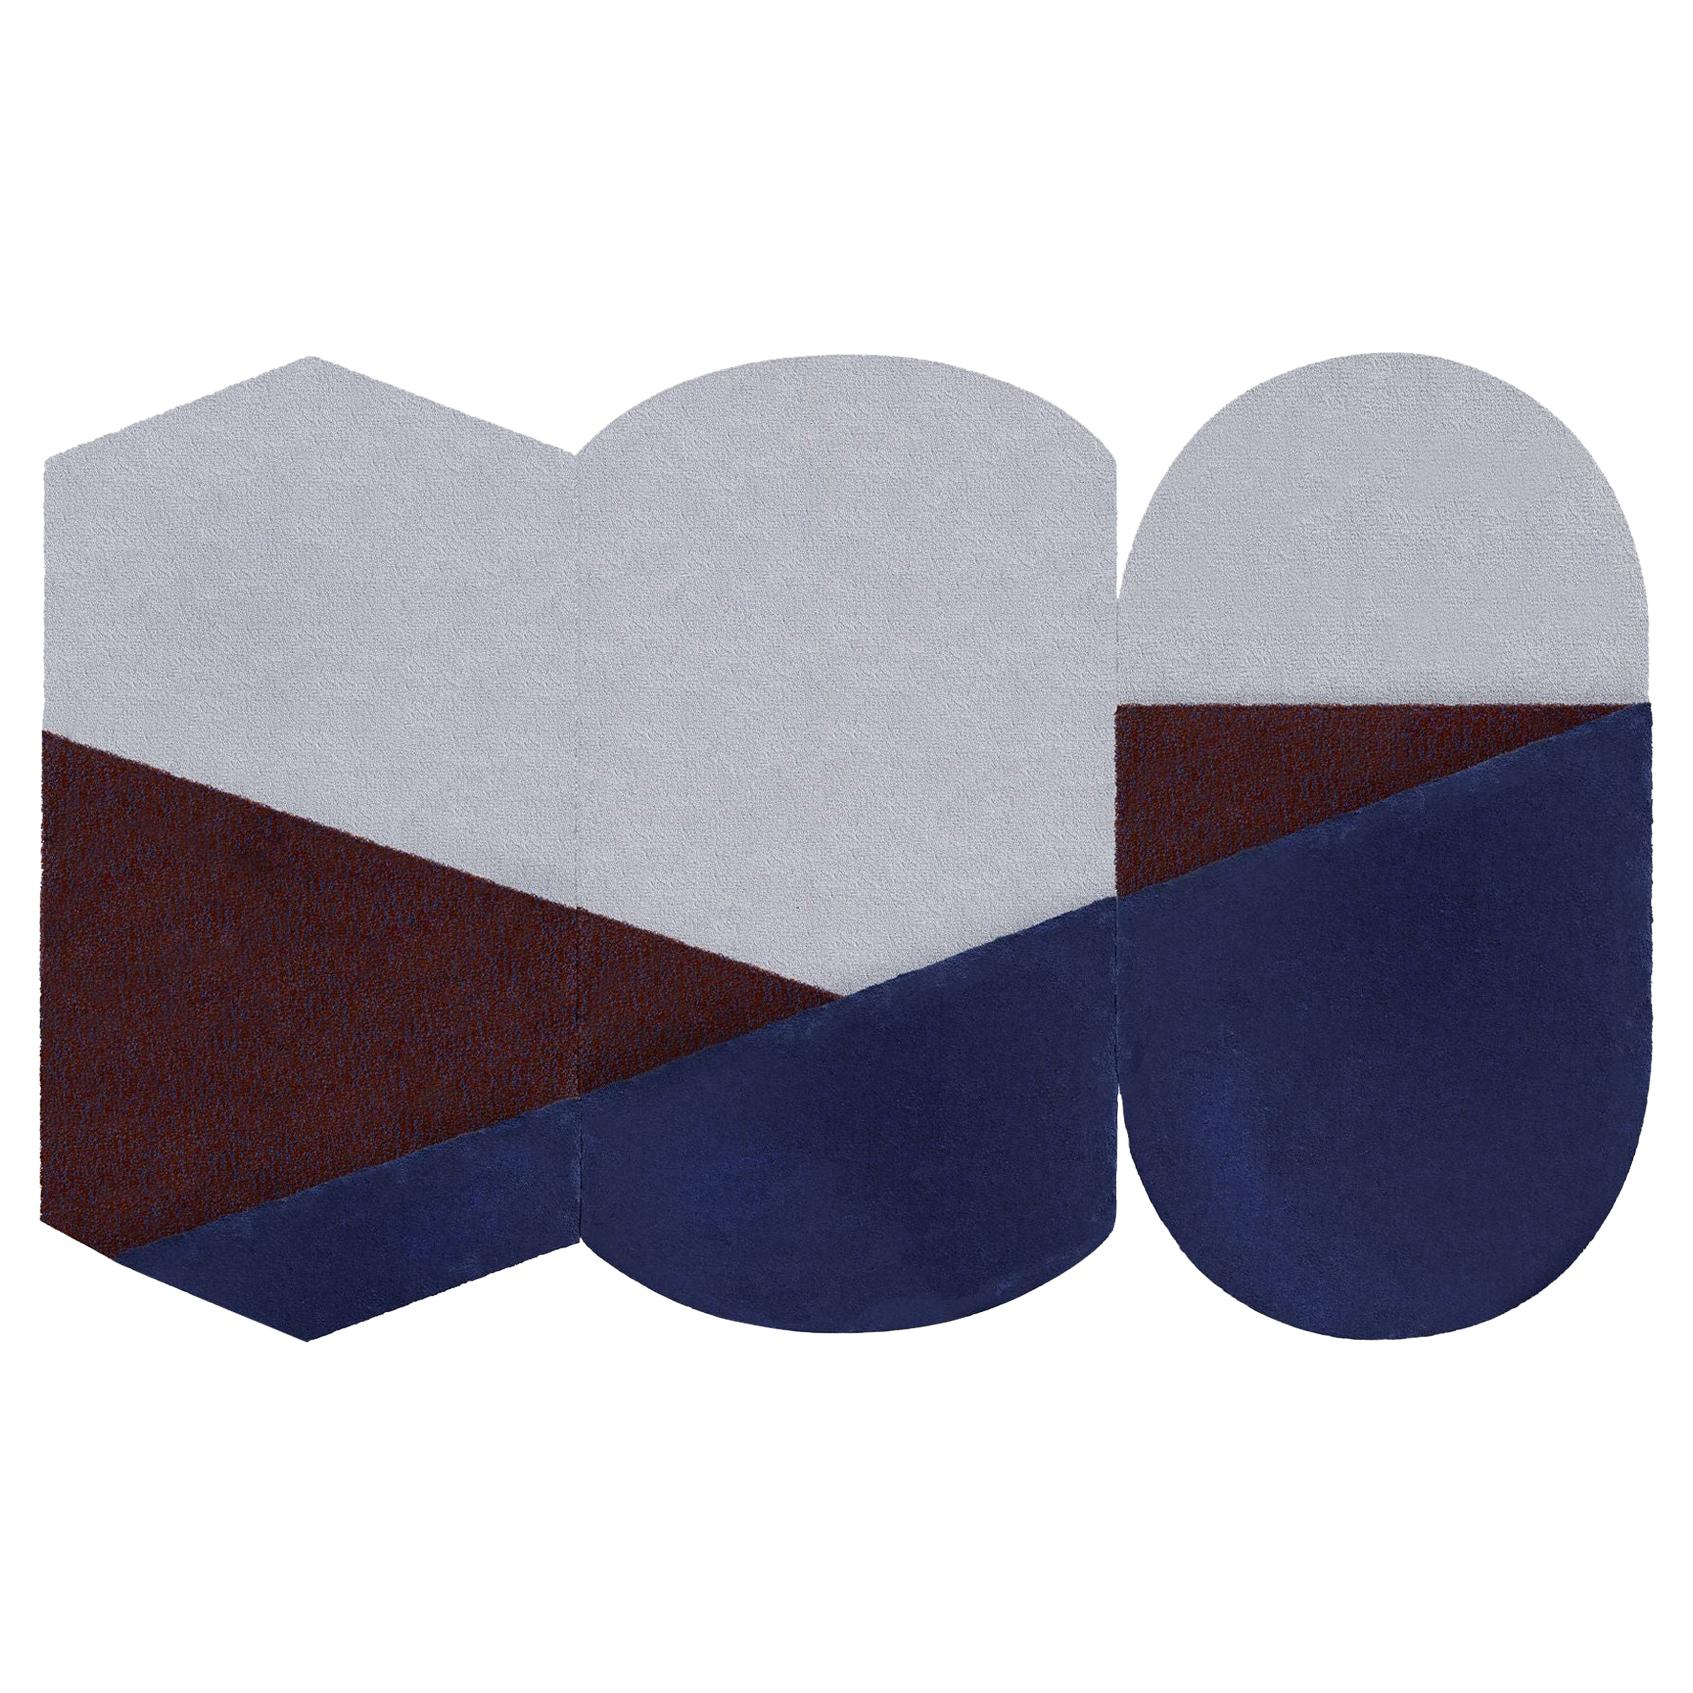 Oci Triptych M, Composition of 3 Rugs 100% Wool /Blue and Brick by Portego For Sale